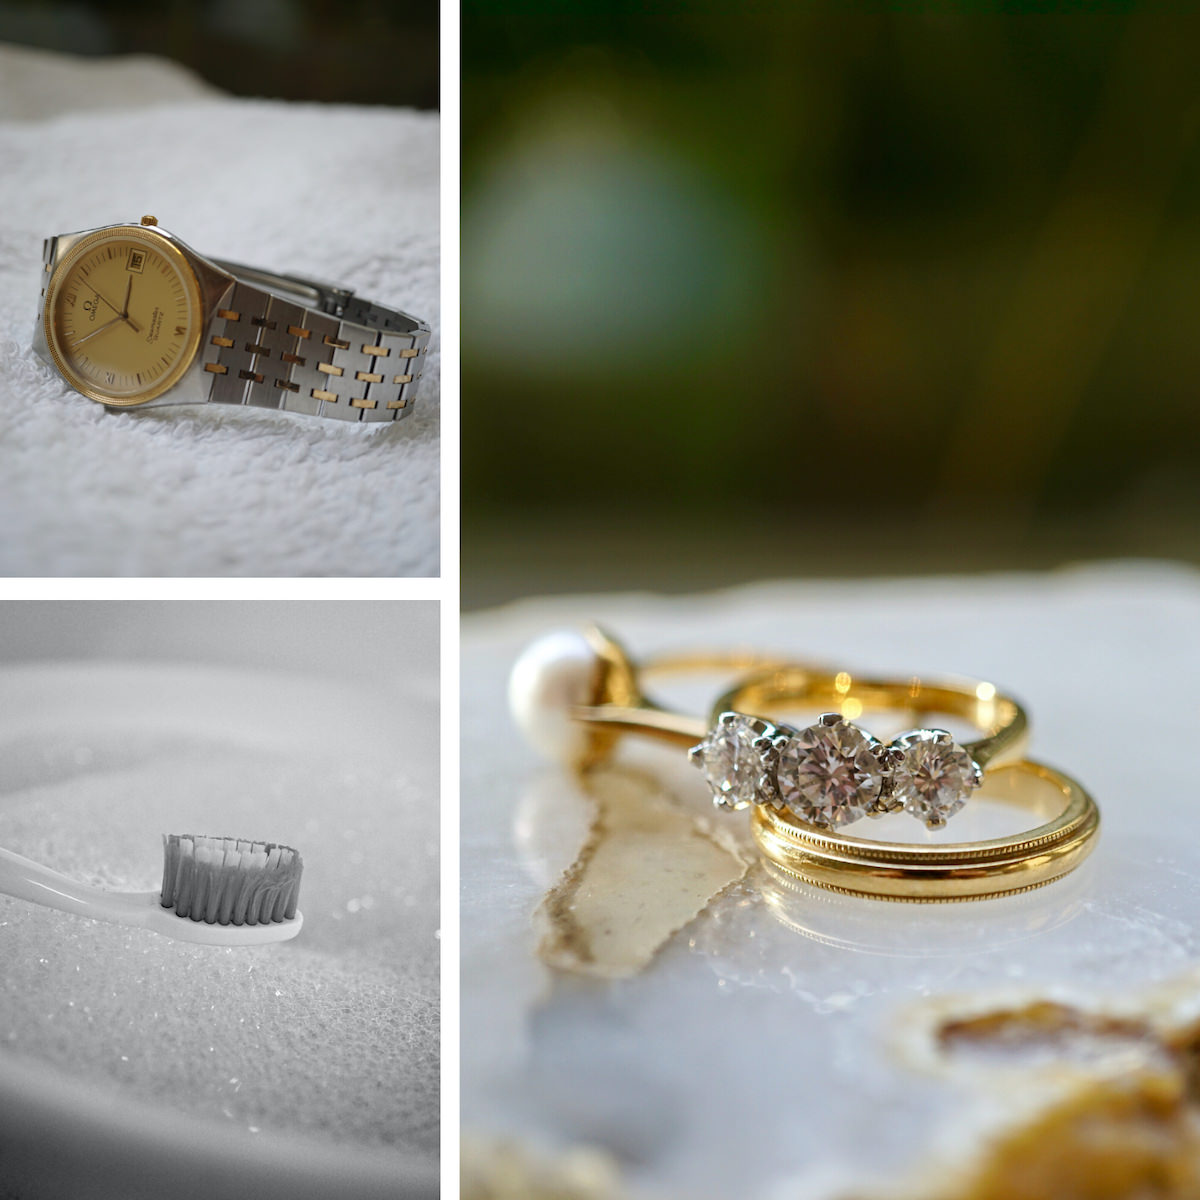 Diamond engagement ring, watch and cleaning solution